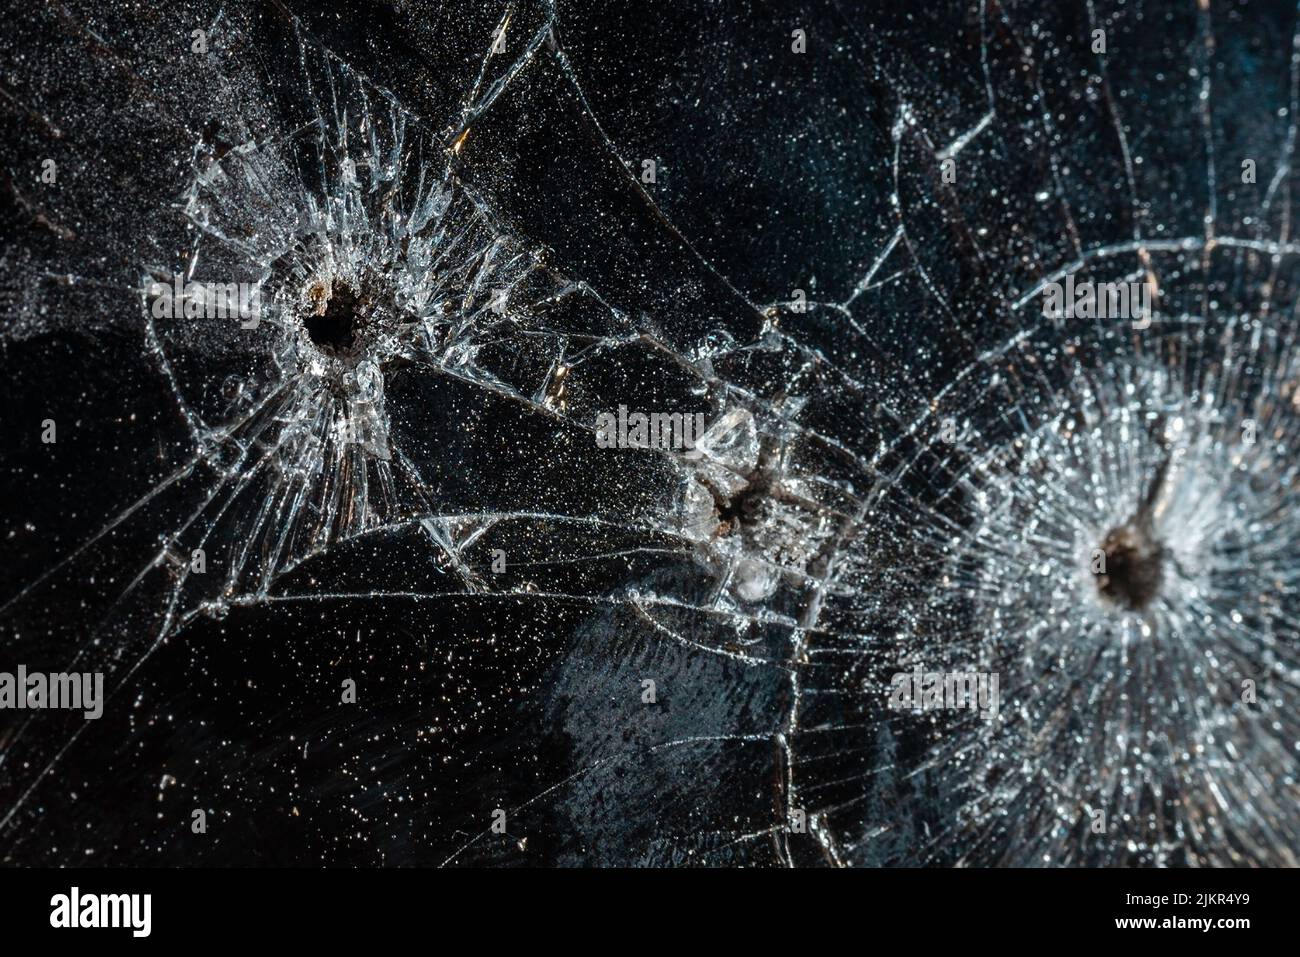 Bullet hole in a glass on the black background.closeup. Stock Photo